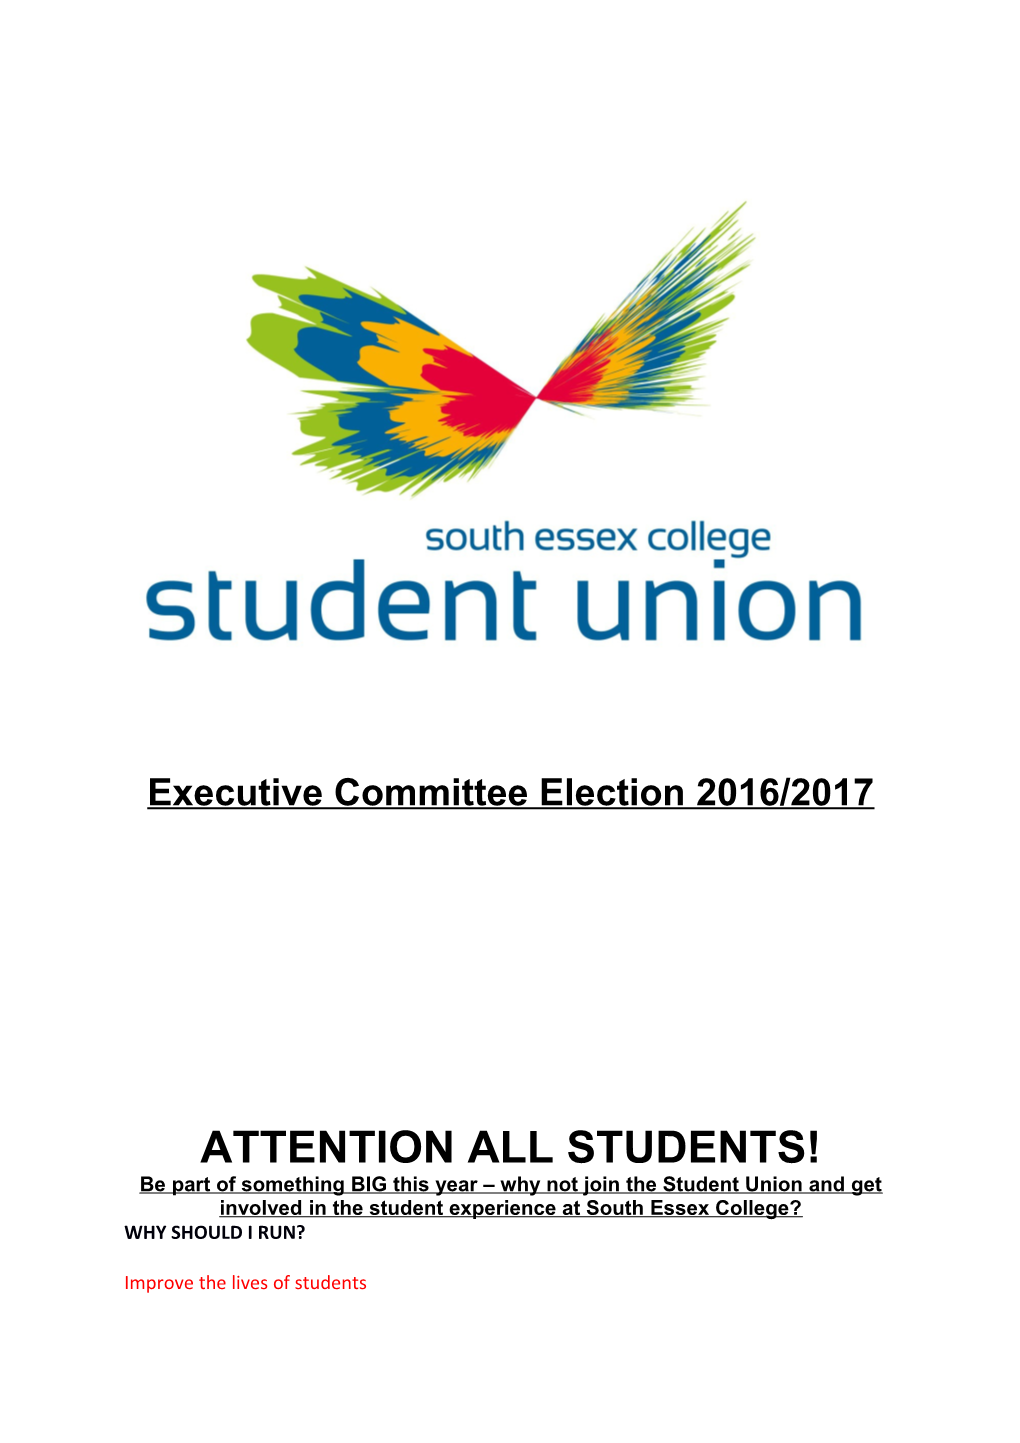 Executive Committee Election 2016/2017